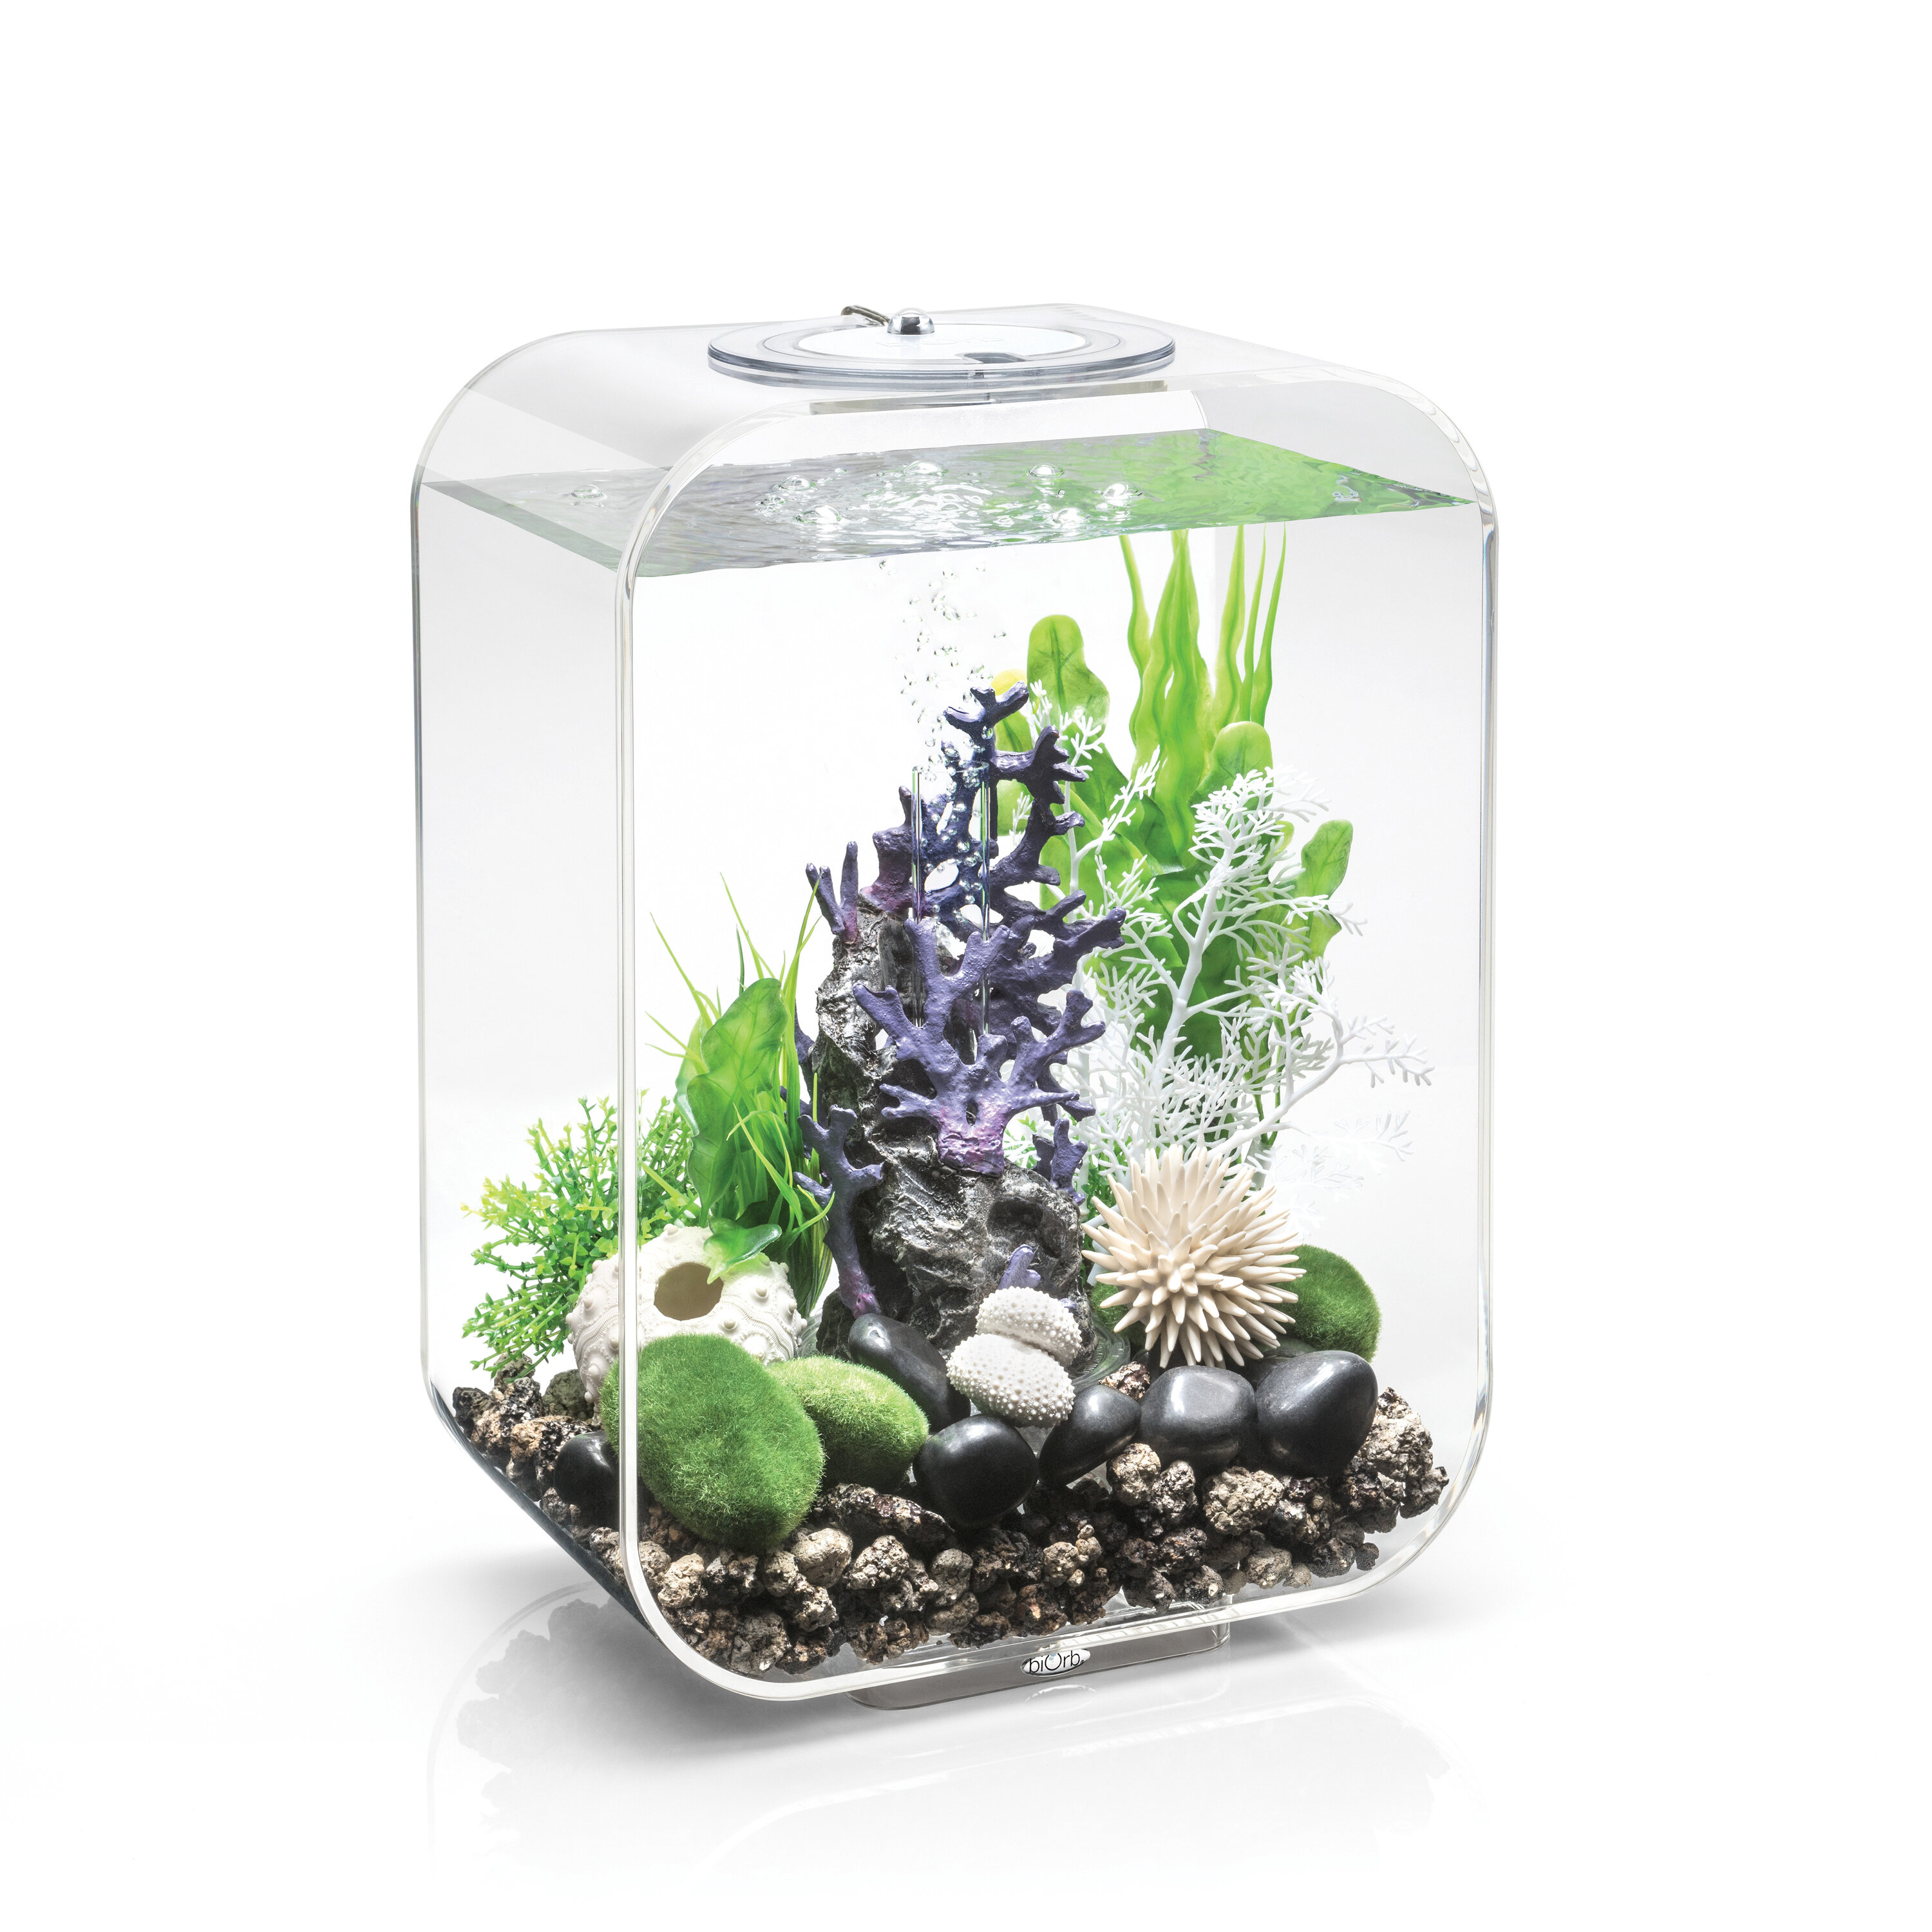 HOBBY size 80x35x0.4 cm - Special mat for Aquariums and Terrariums